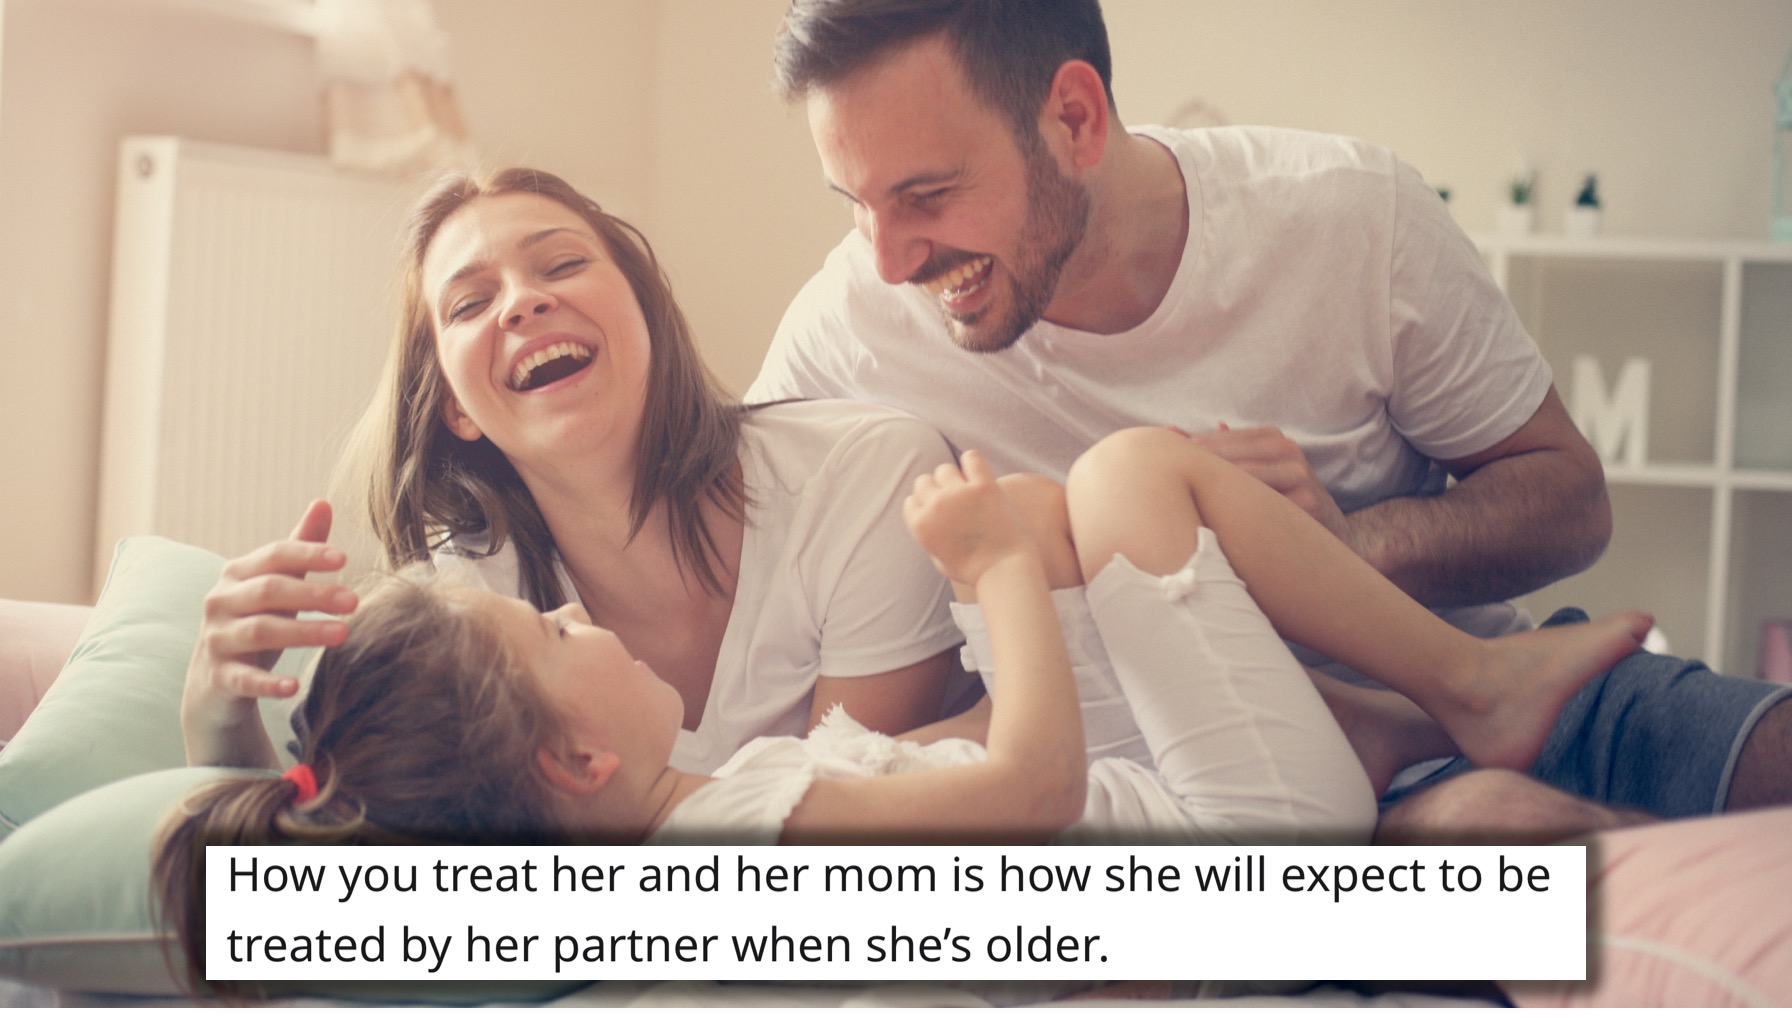 Women of Reddit Chime in With Advice for Dads Raising Daughters